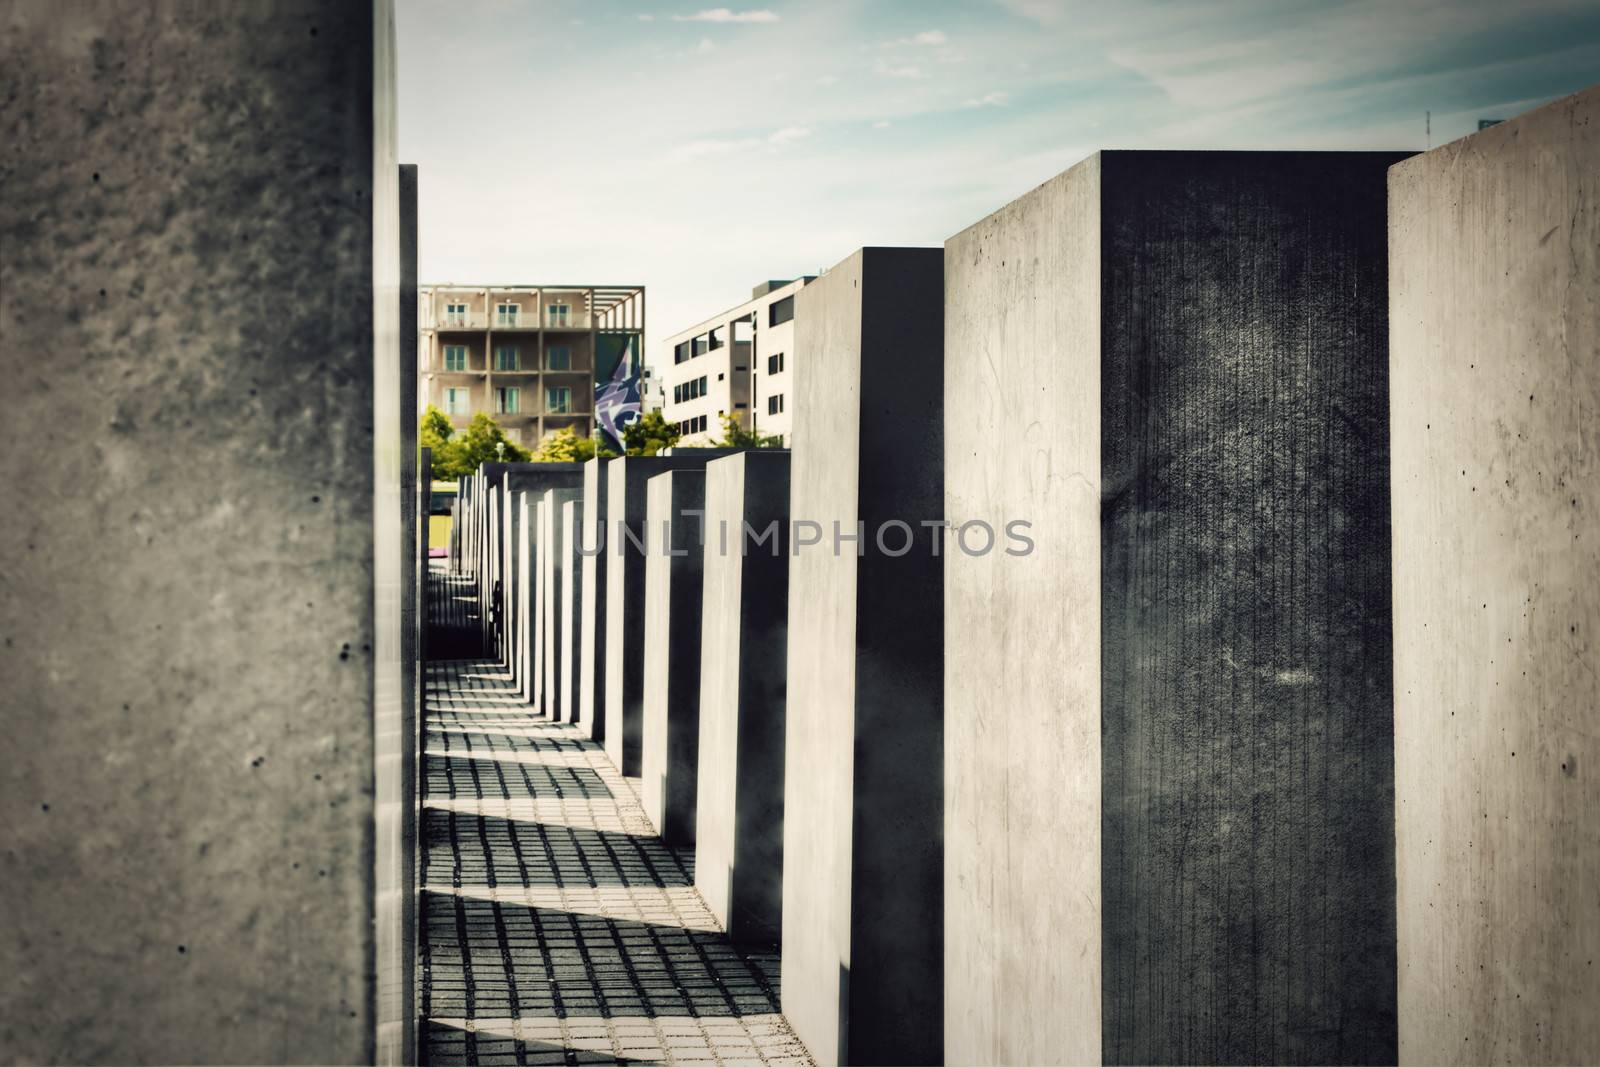 The Holocaust Memorial, Berlin, Germany. Memorial to the Murdered Jews of Europe